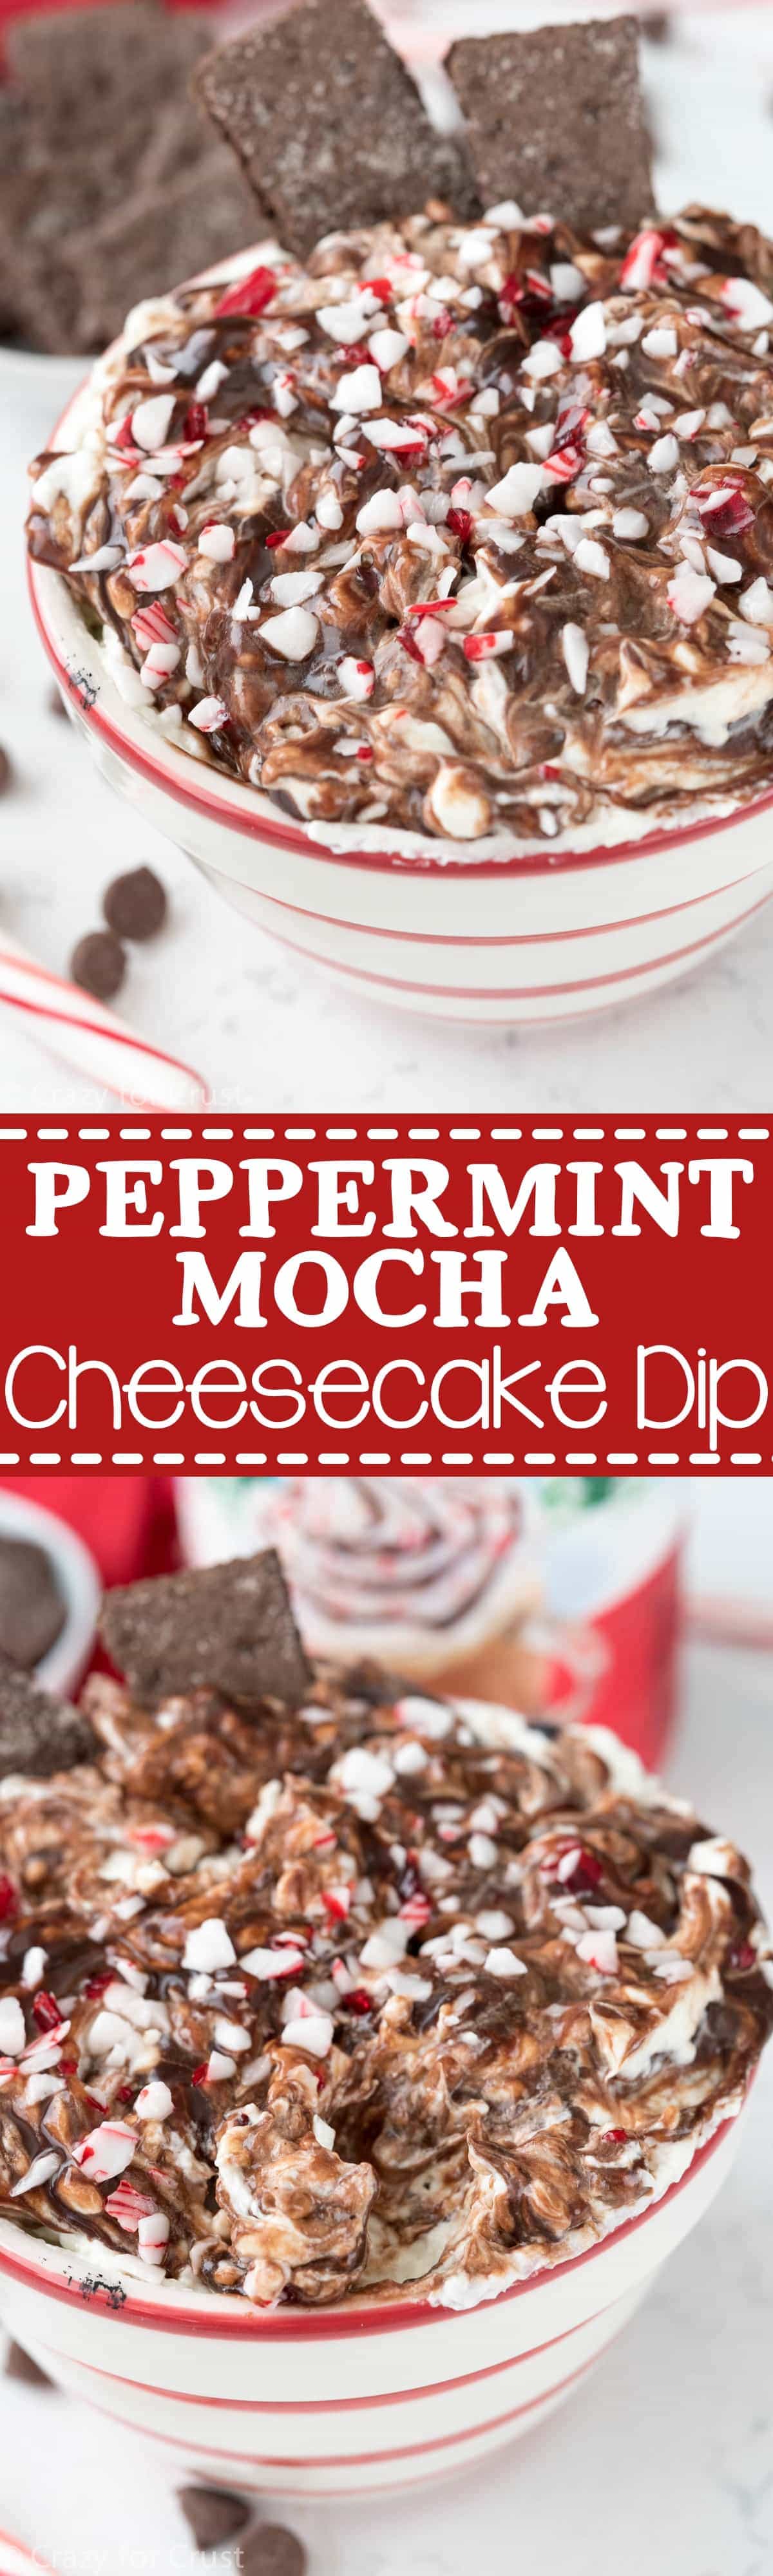 Peppermint Mocha Cheesecake Dip - this easy dip recipe is perfect for Christmas parties! It's so fast to make and the perfect peppermint recipe to feed a crowd.